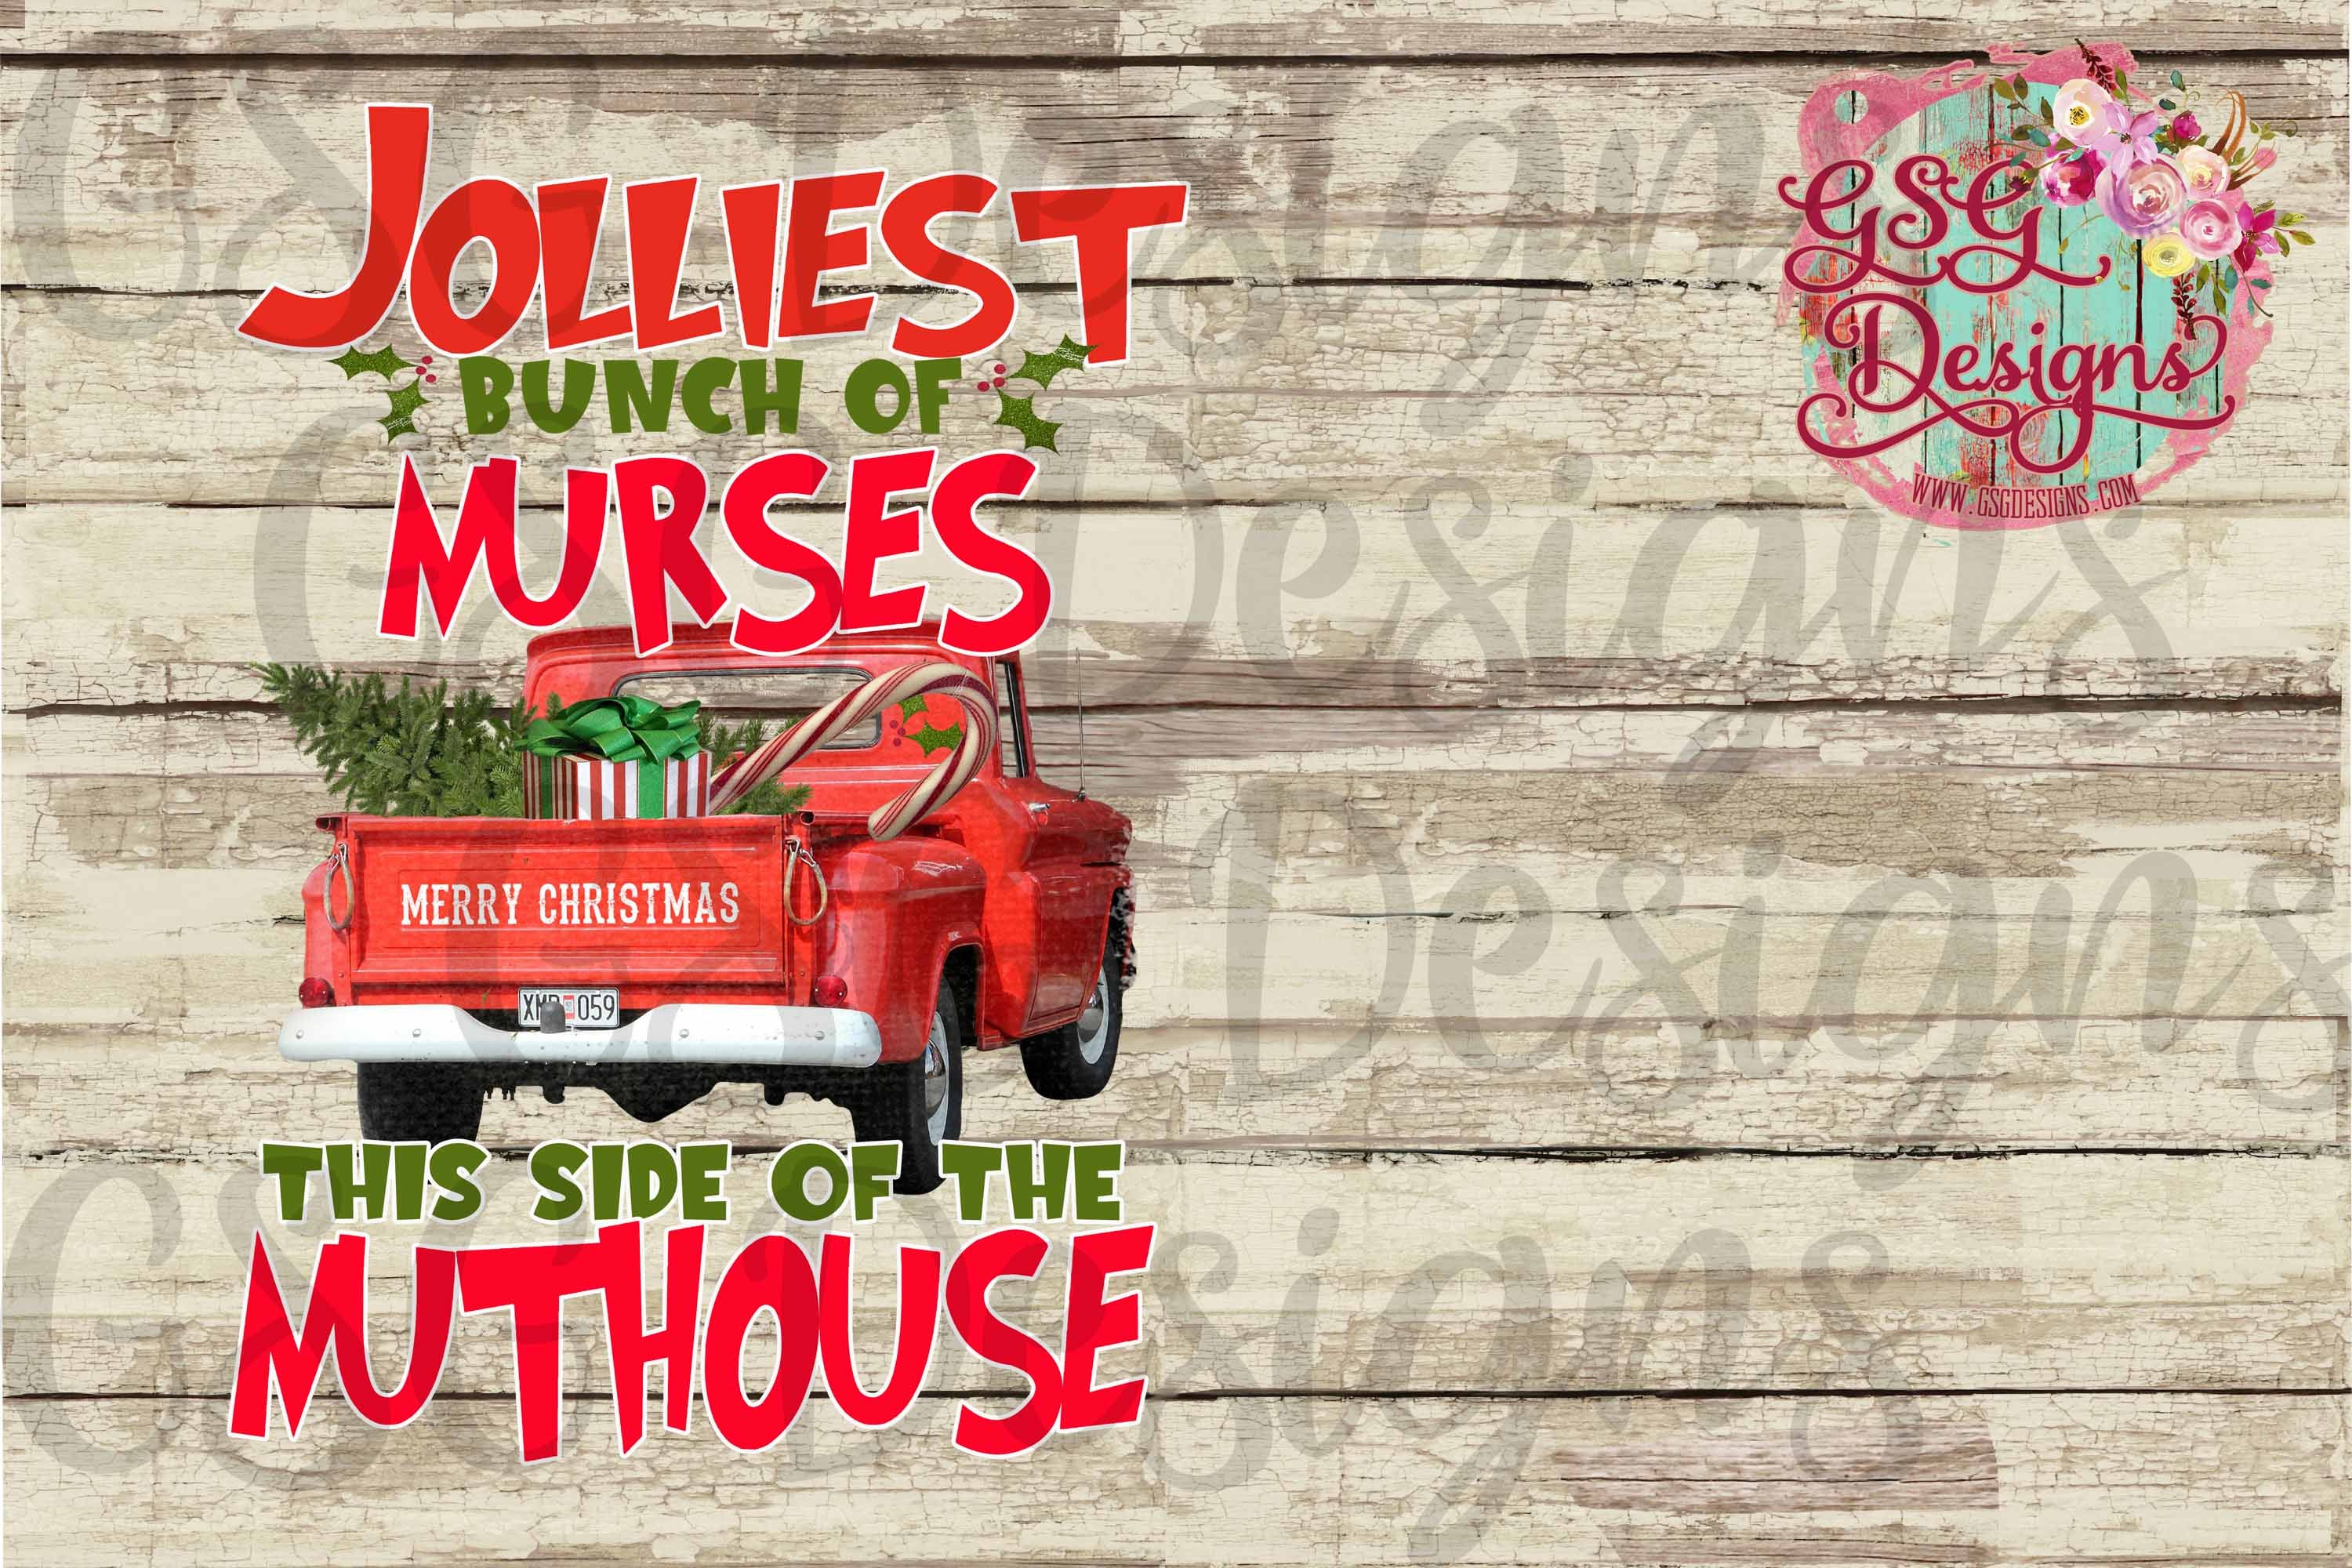 Jolliest Bunch of Nurses This Side of the Nuthouse Christmas Digital Design File